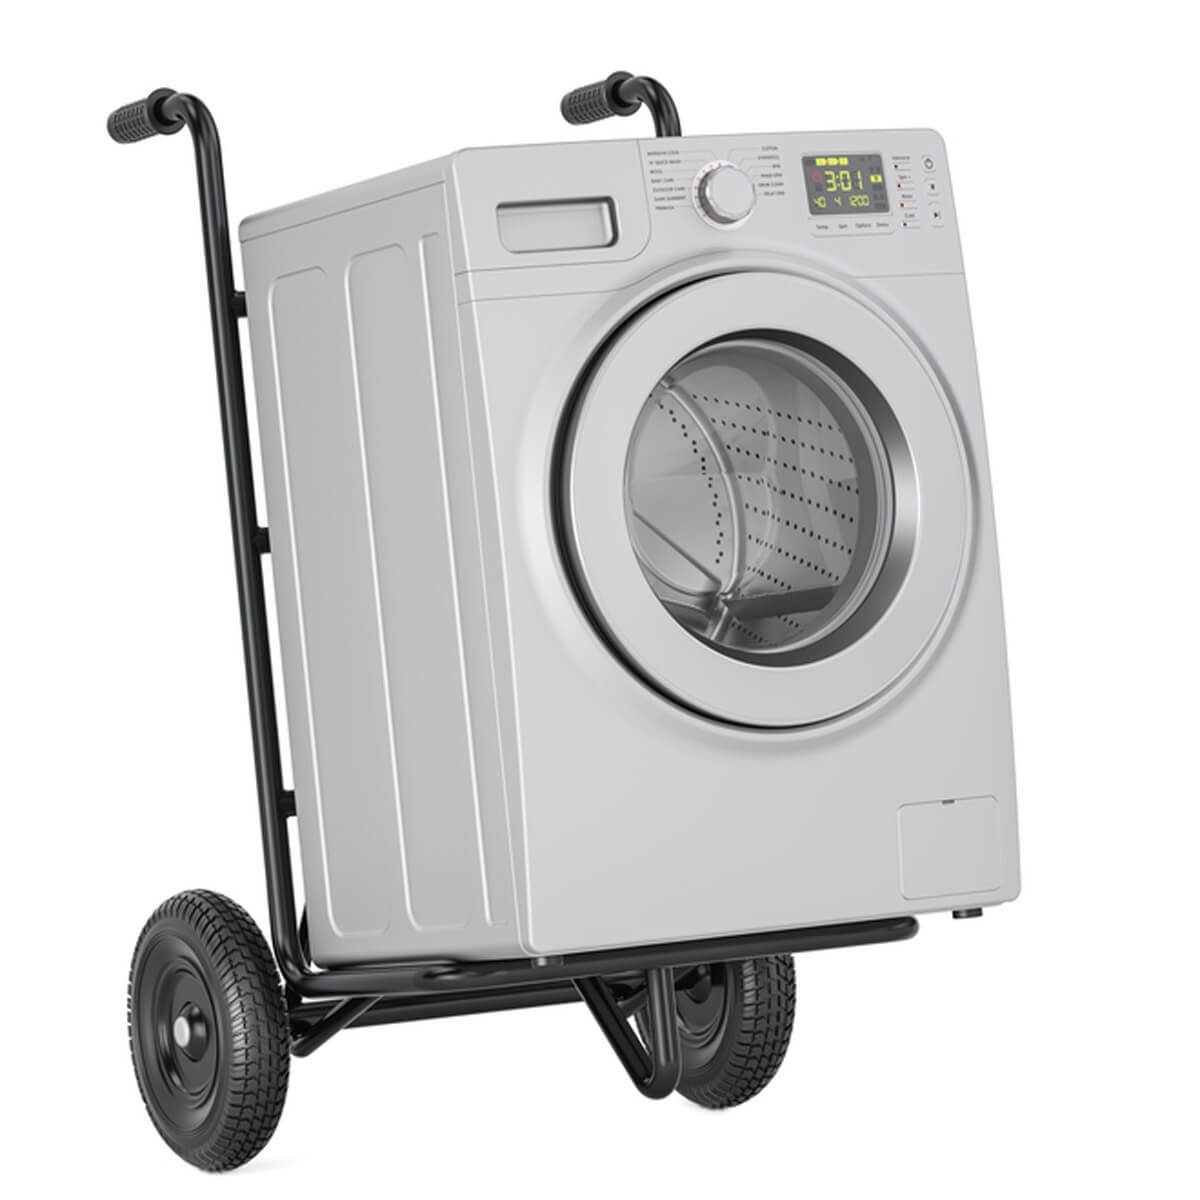 Small washer and dryer for apartment size - appliances - by owner - sale -  craigslist